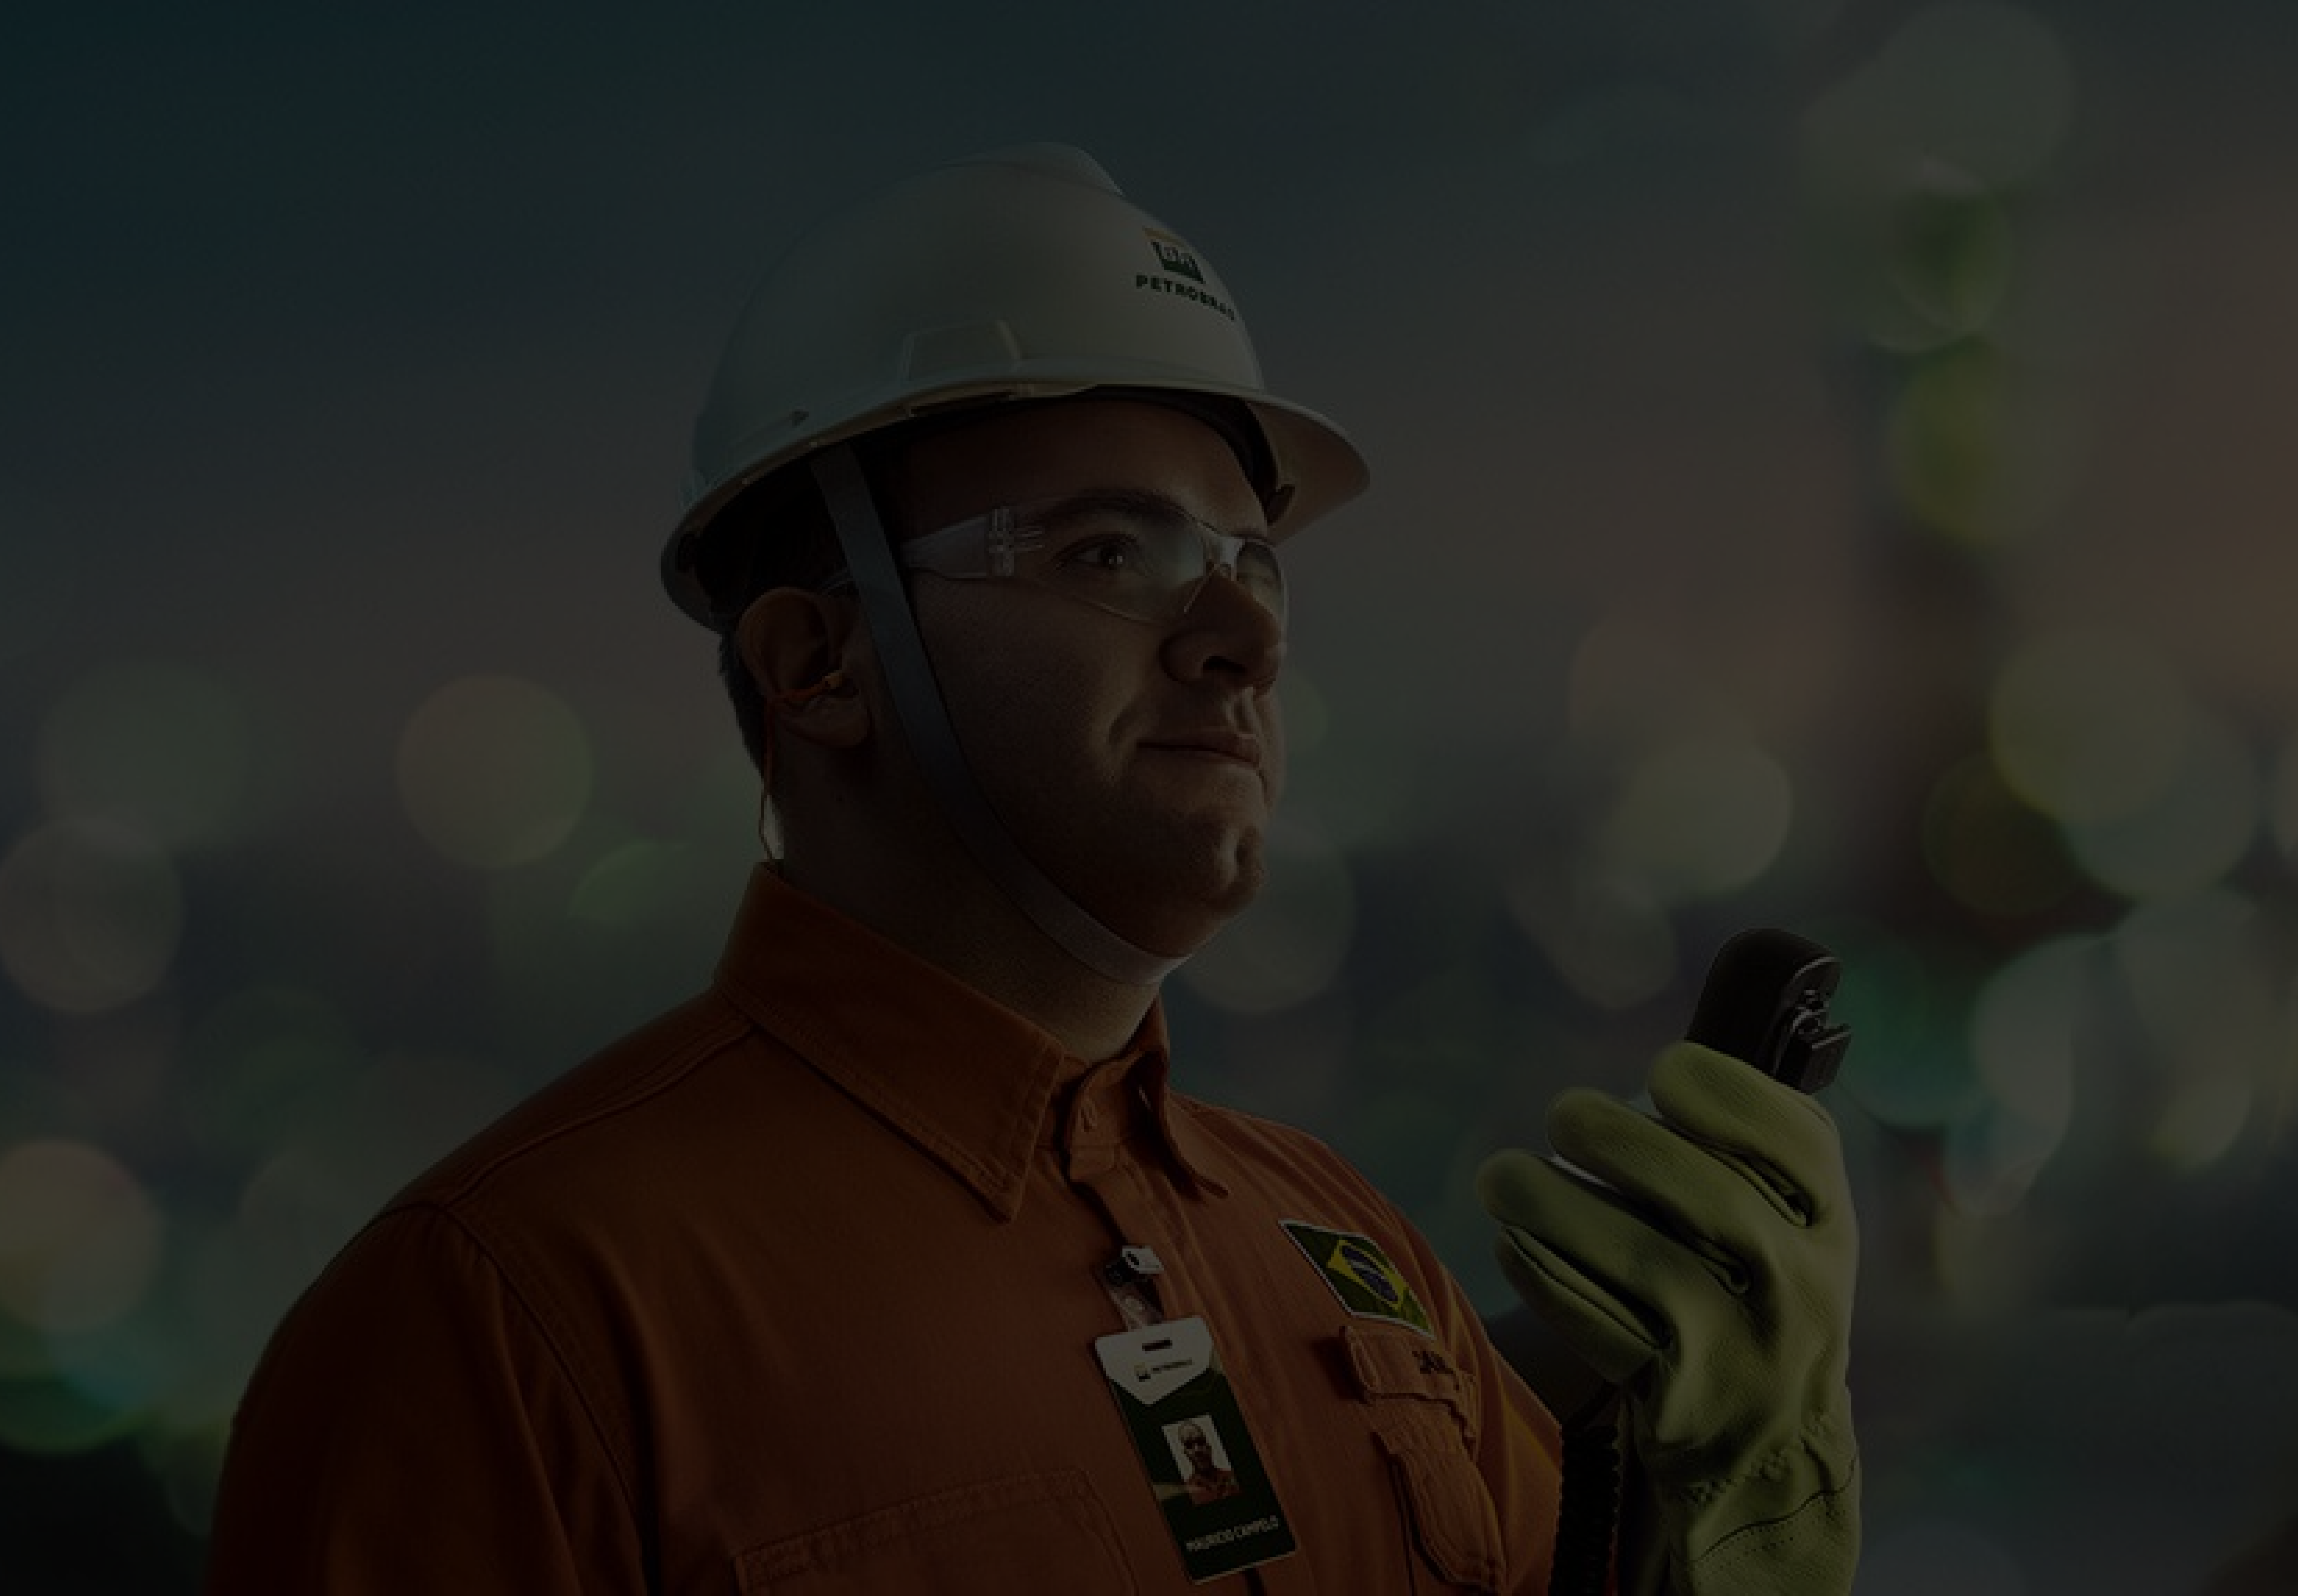 A man in a Petrobras uniform holding a walkie-talkie in his left hand.